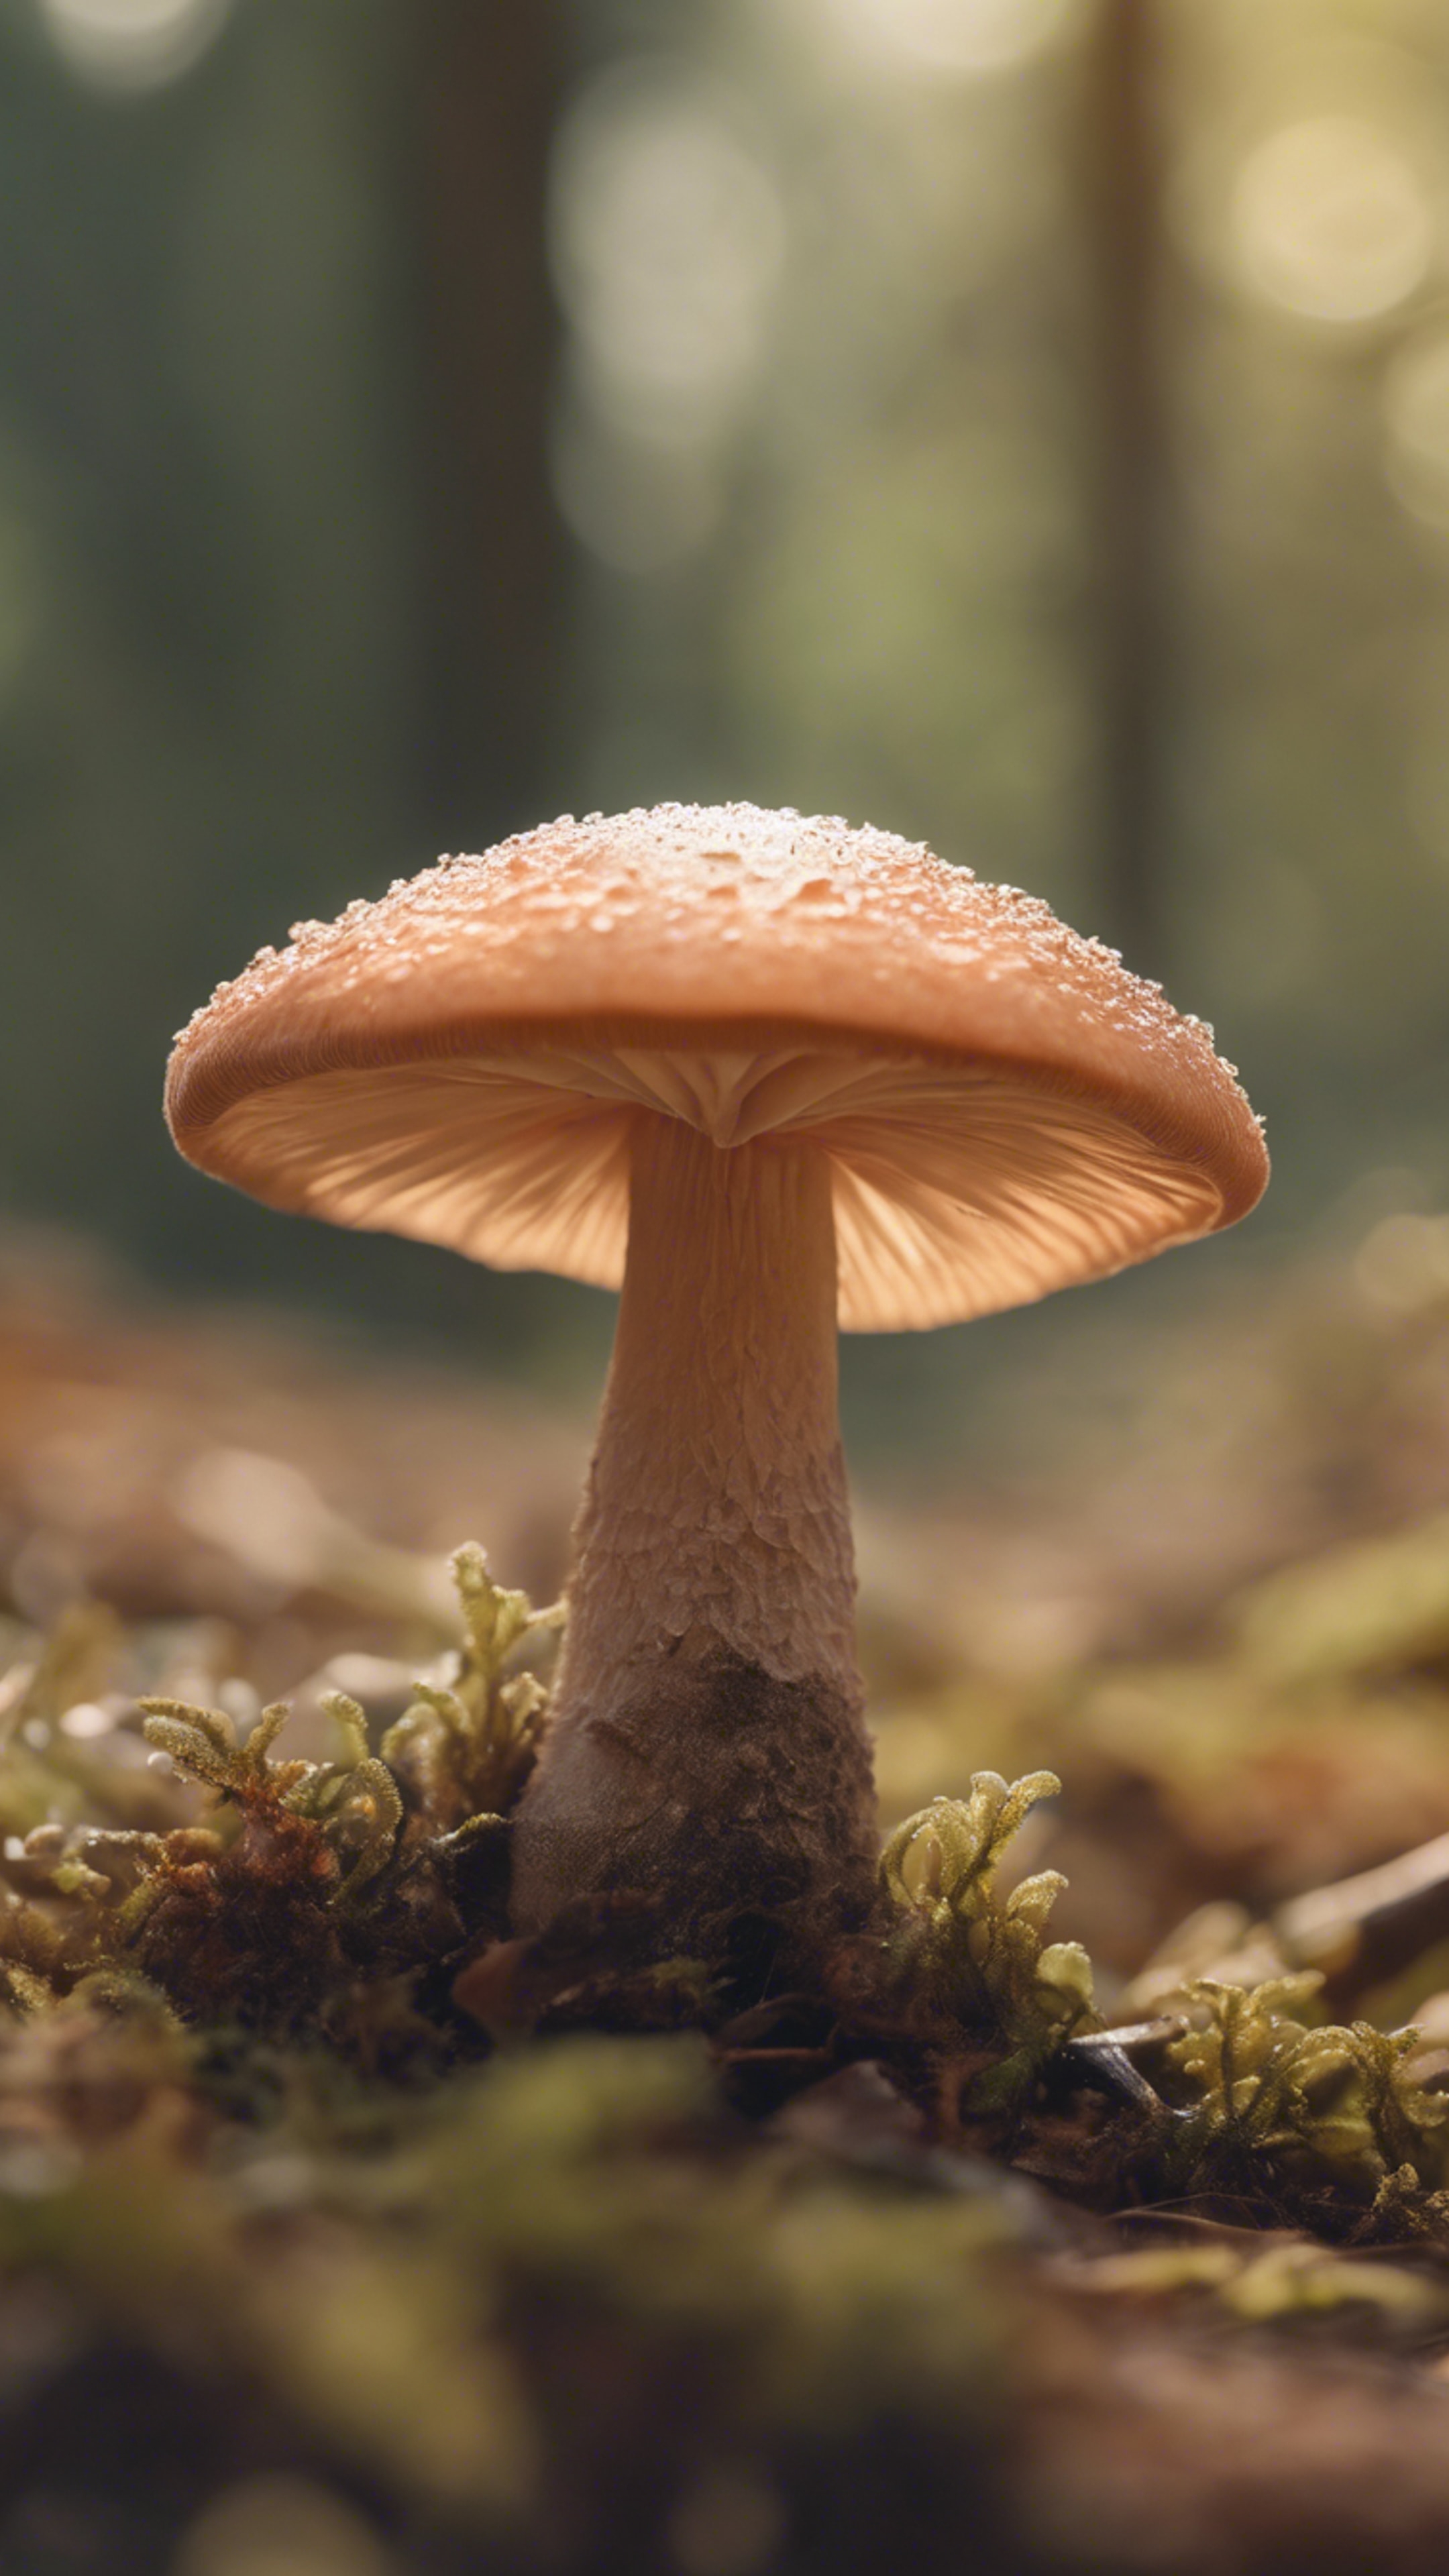 A close-up of a small, cute mushroom, peach color, with soft, sunlit forest scenery in the background. วอลล์เปเปอร์[125df3bad49b42d8bf38]